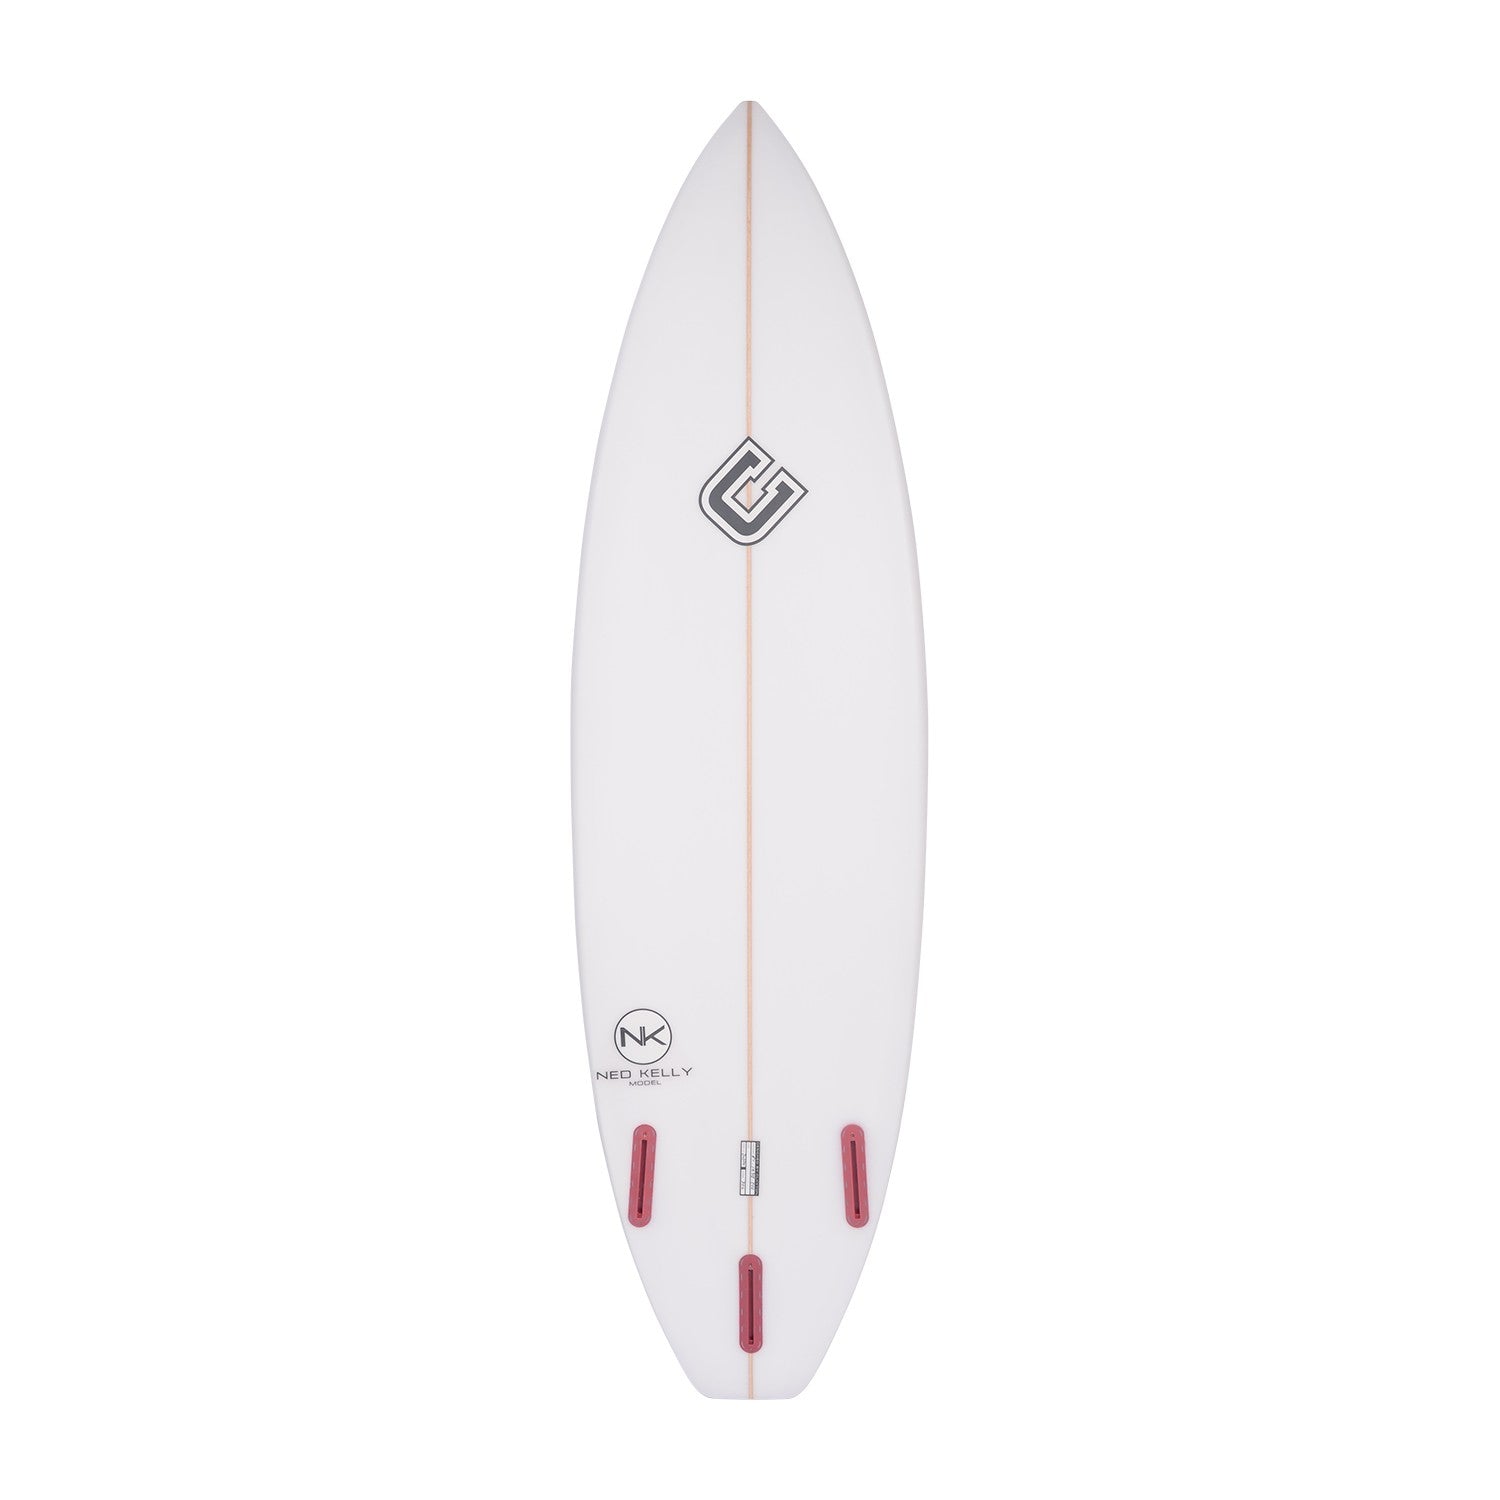 CLAYTON Surfboards - Ned Kelly (PU) Futures - 6'1